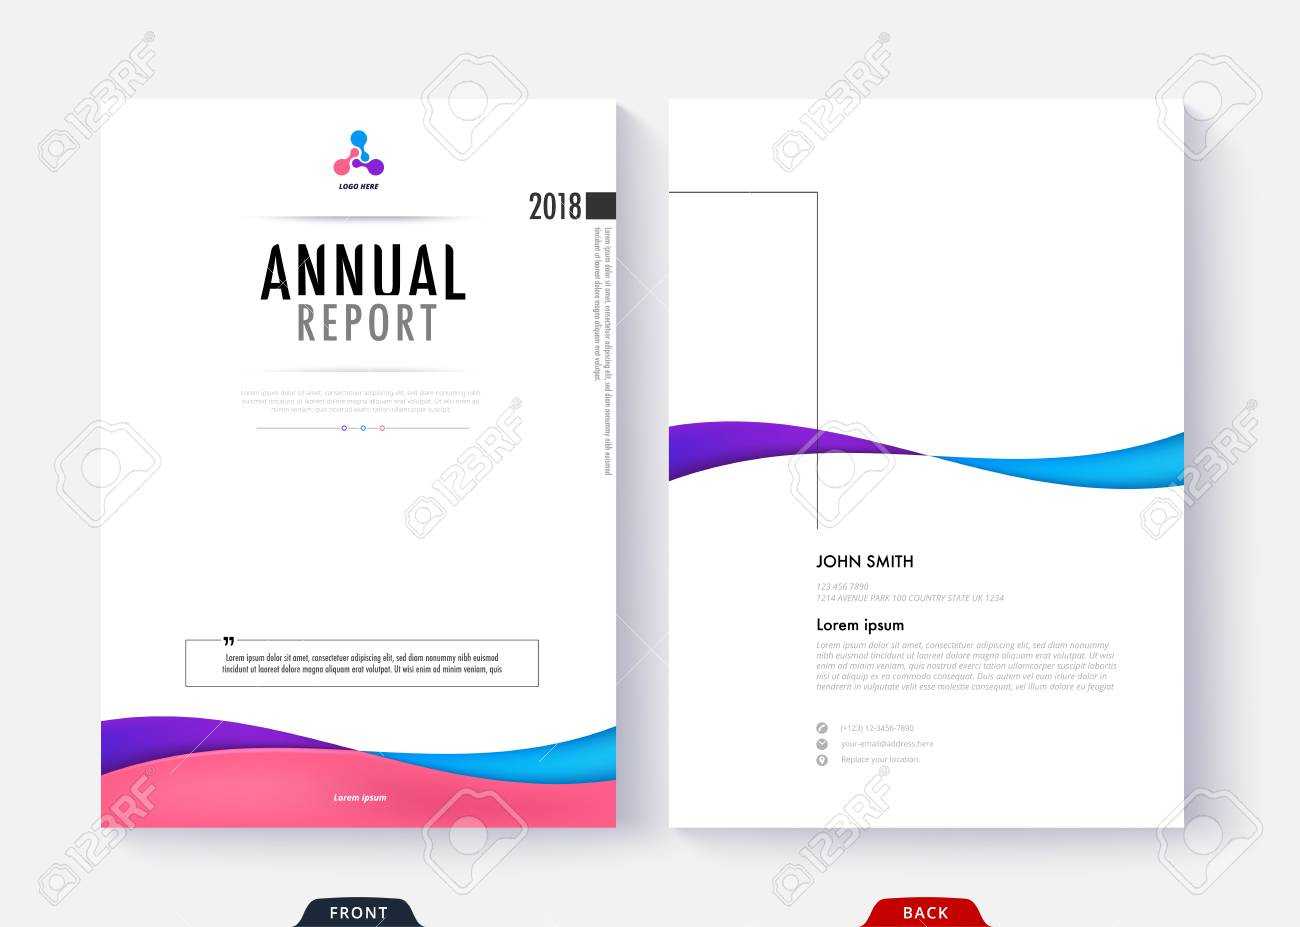 024 Report Cover Page Template Annual Design For Business Regarding Report Front Page Template